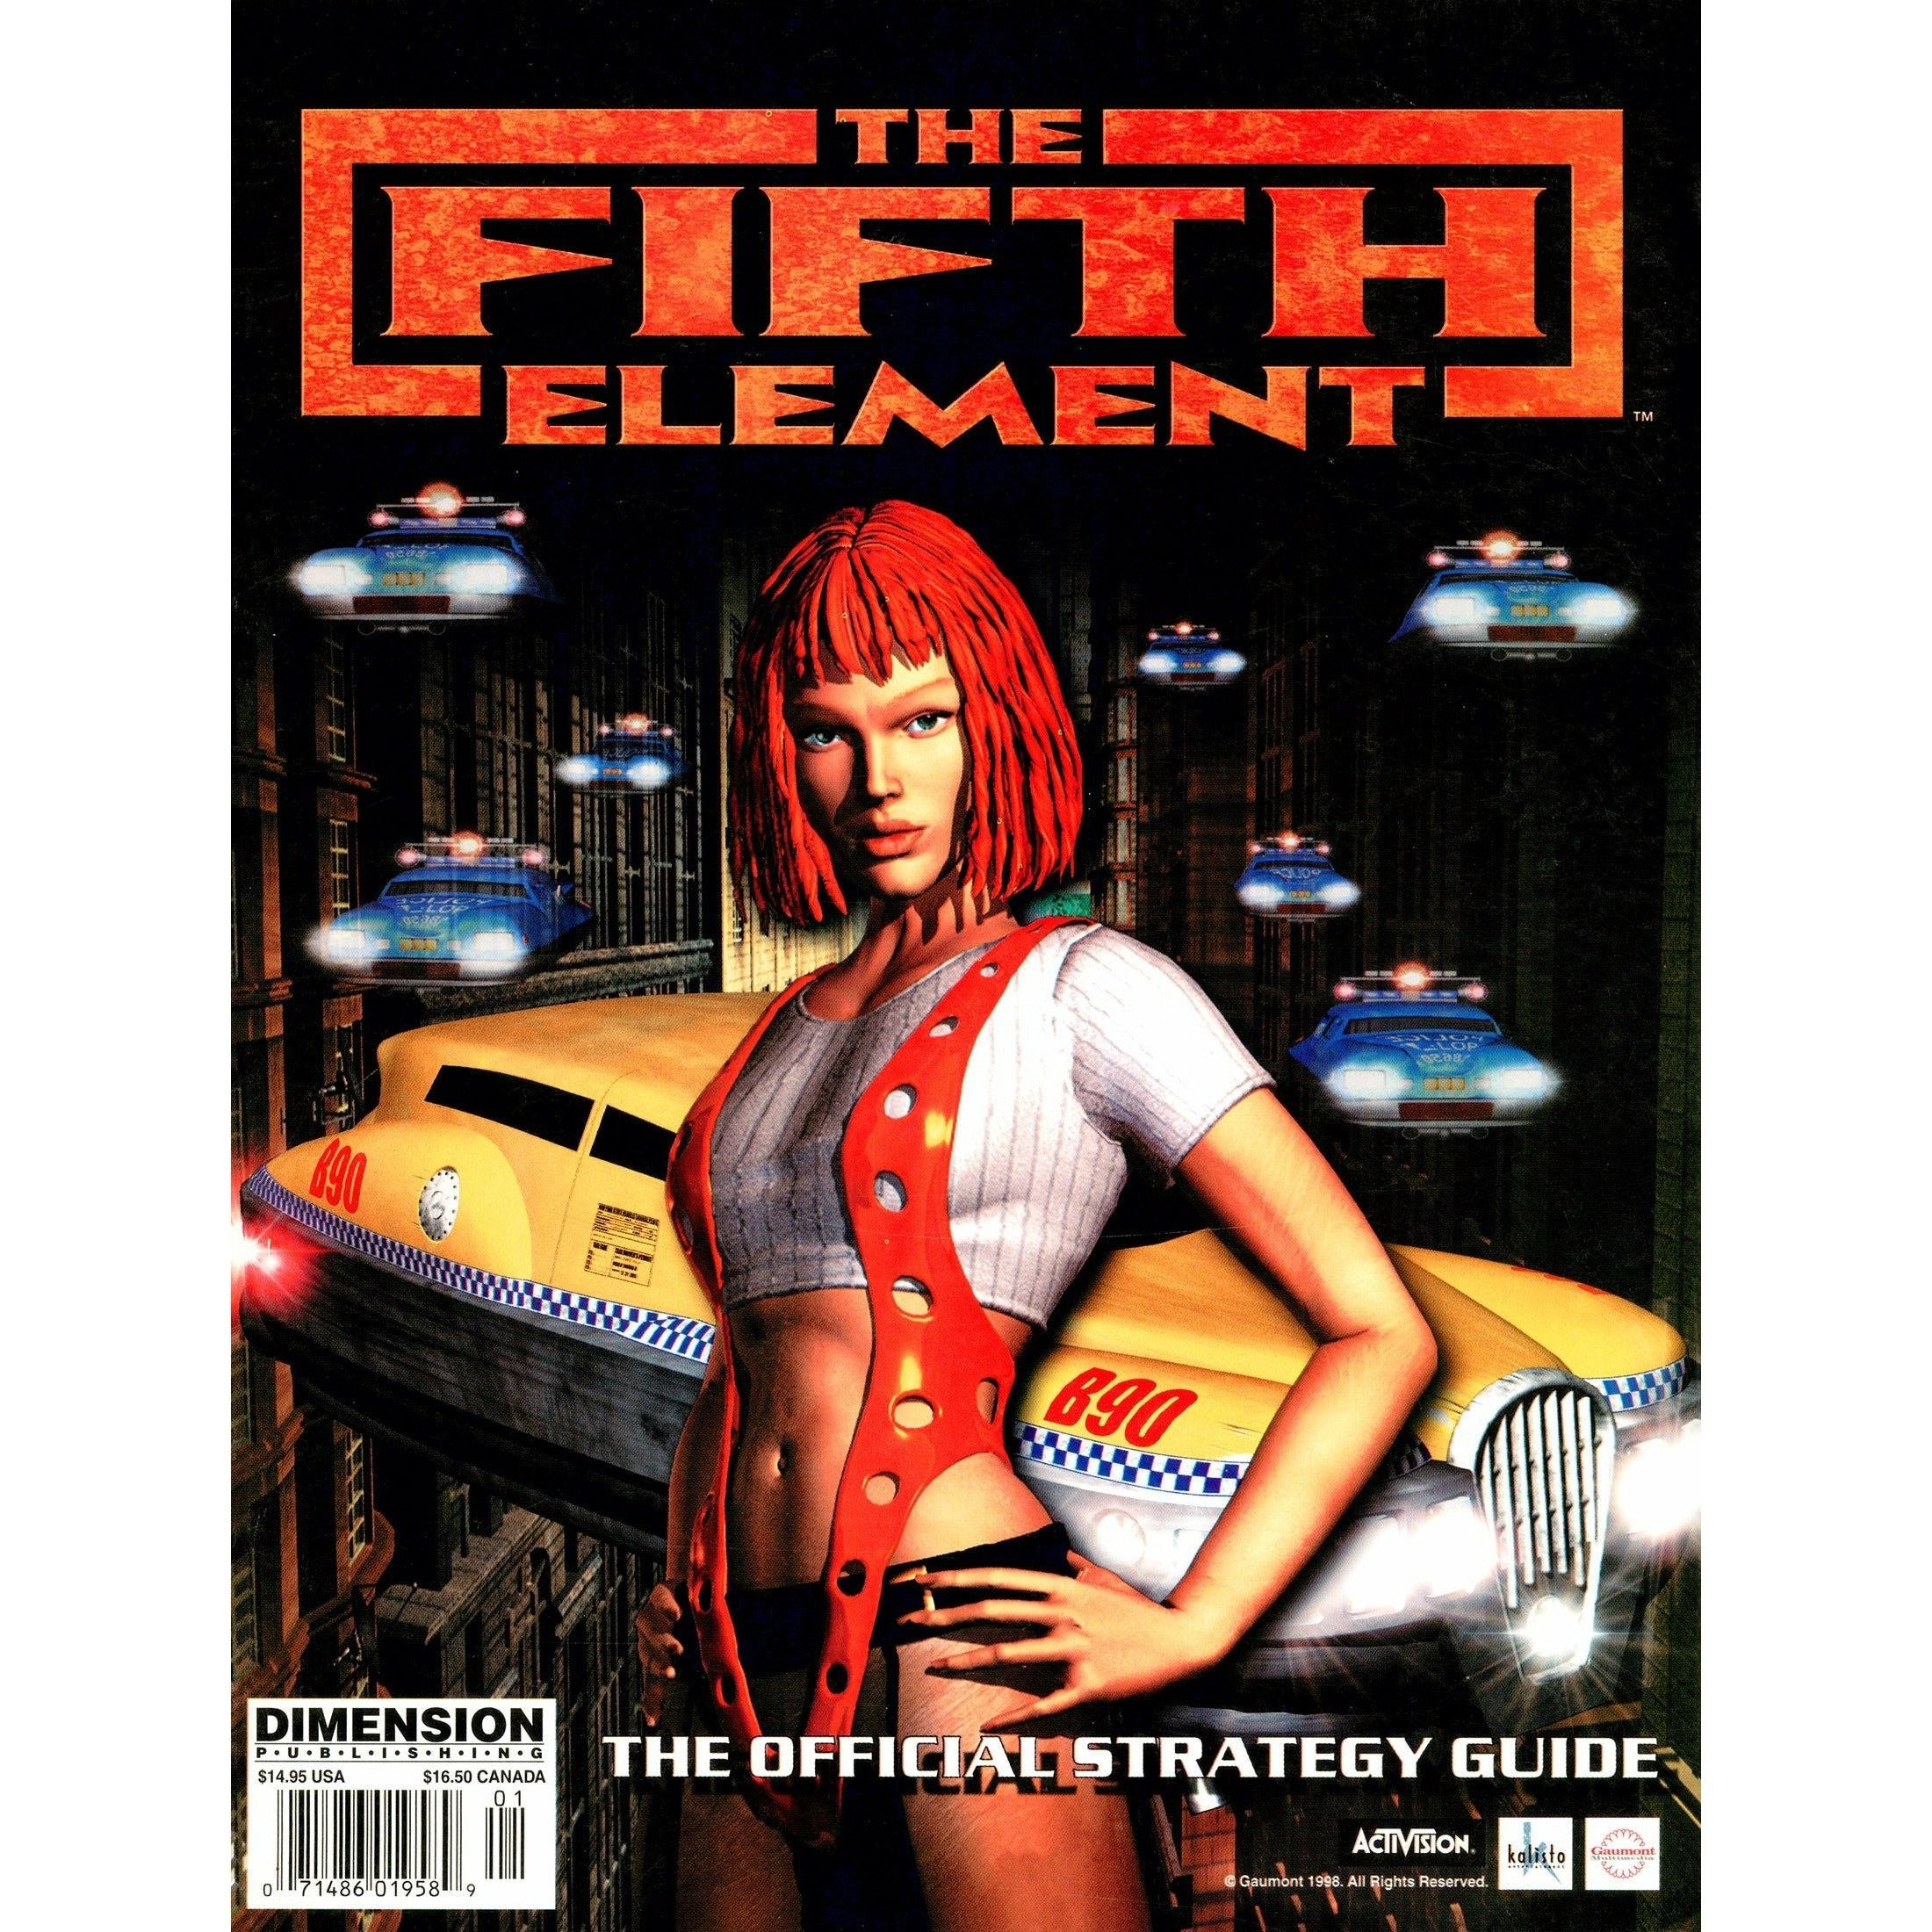 STRAT - The Fifth Element